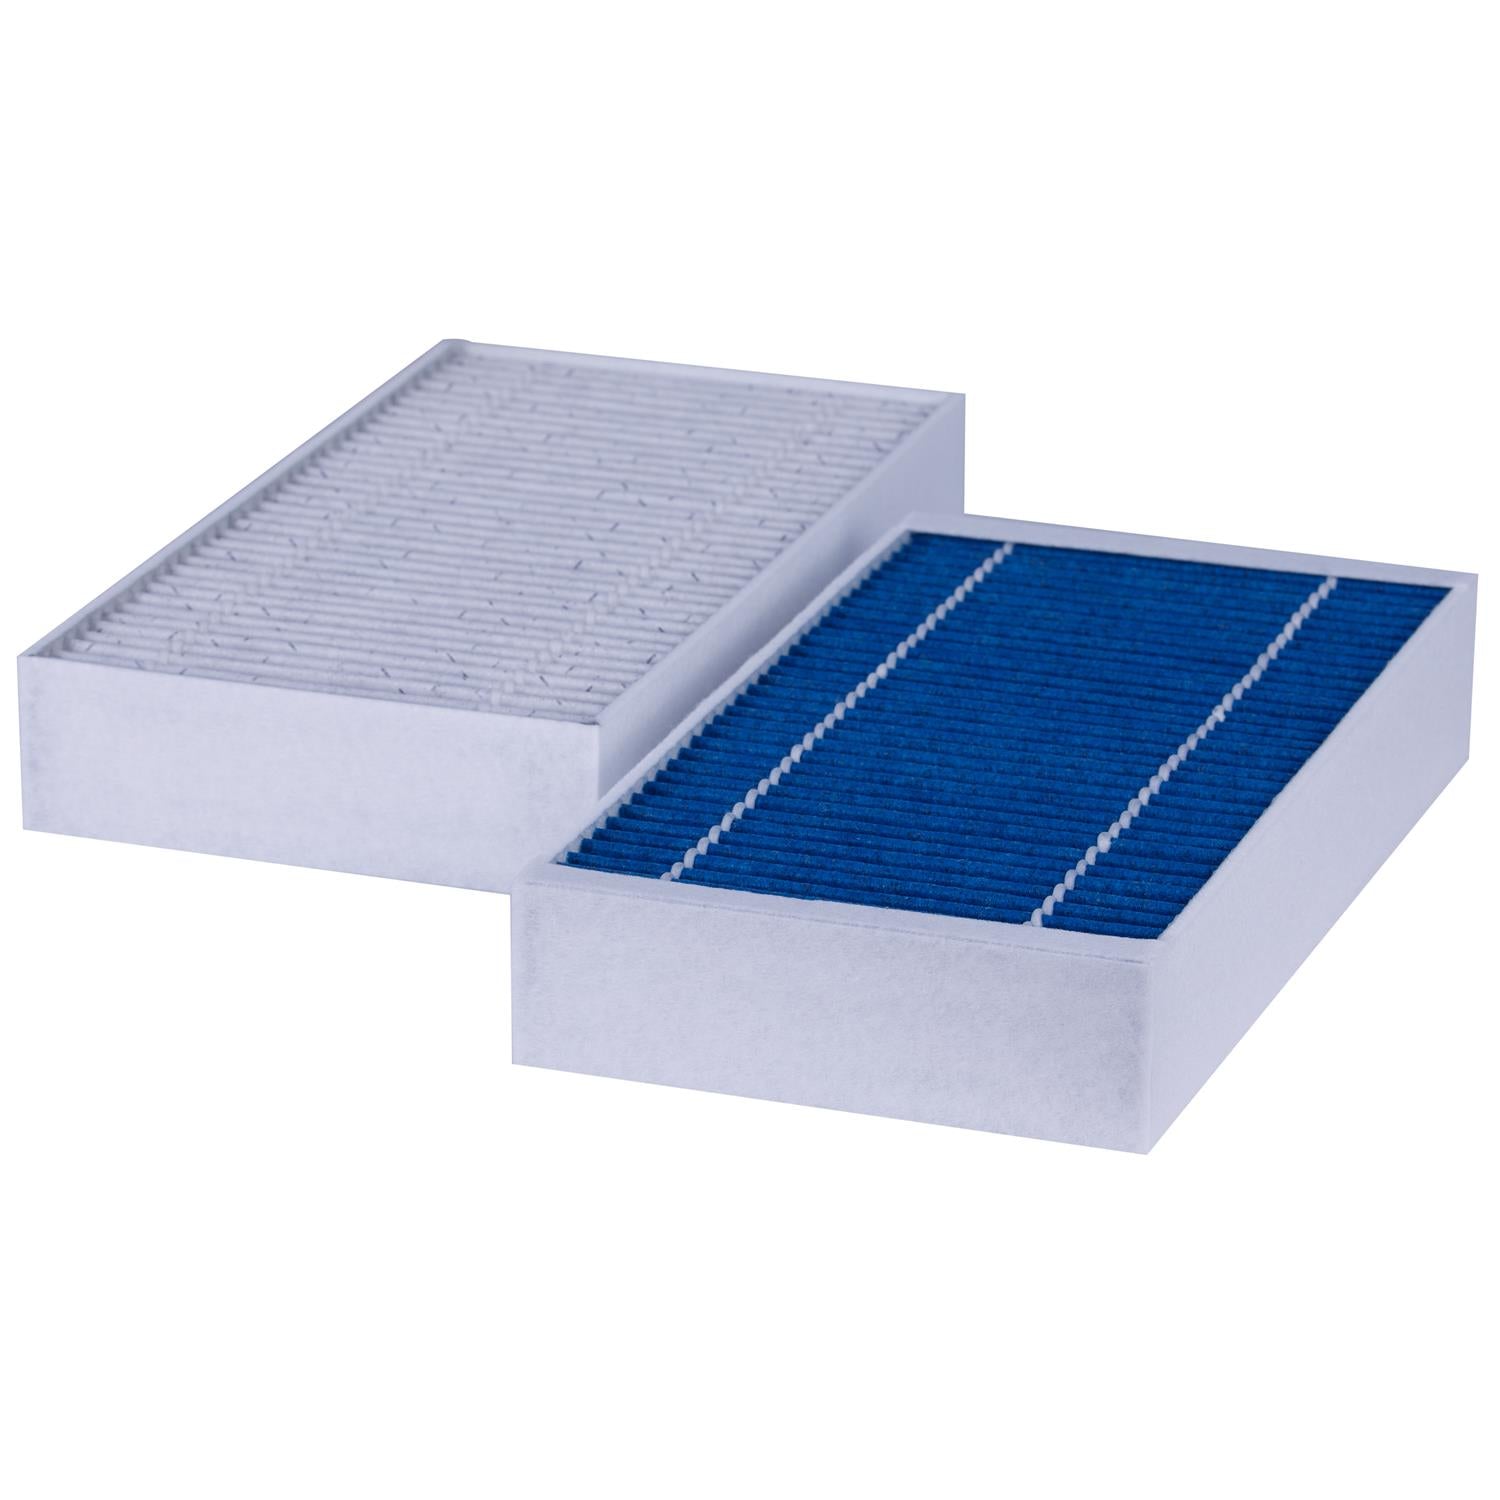 PUREFLOW 2011 Mercedes-Benz R350 Cabin Air Filter with HEPA and Antibacterial Technology, PC9376HX